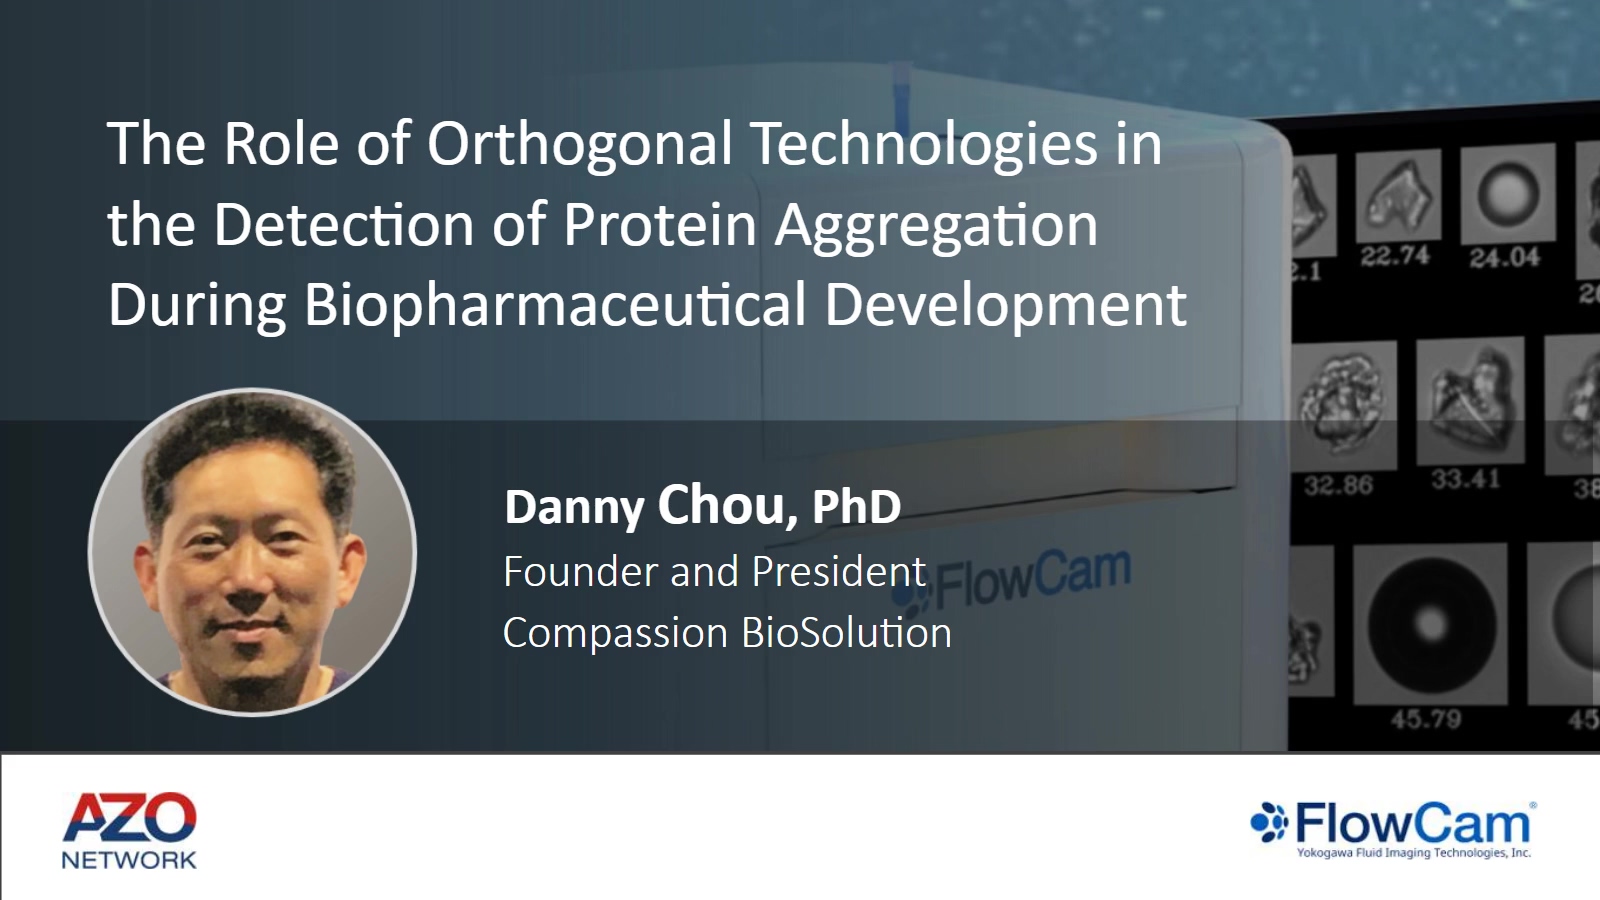 Webinar title card - The Role of Orthogonal Technologies in the Detection of Protein Aggregation During Biopharmaceutical Development